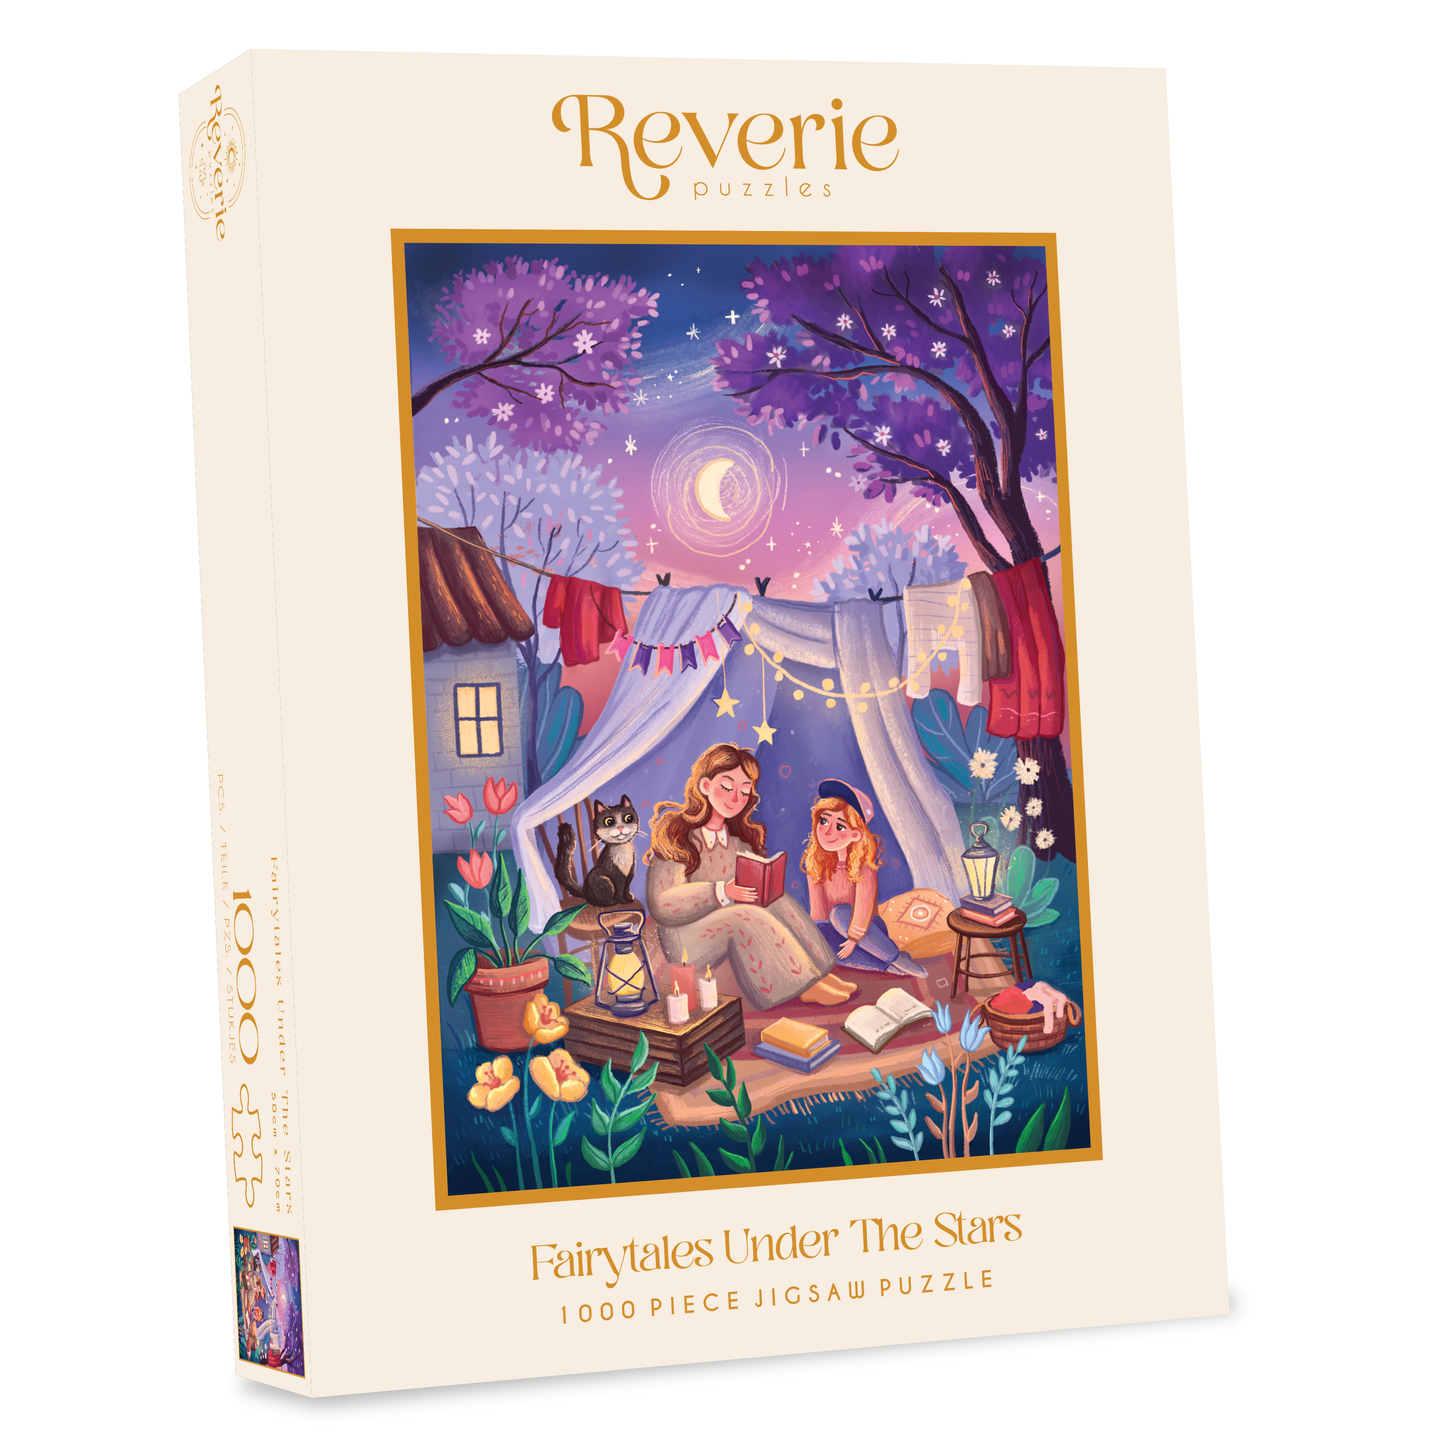 Reverie Puzzles - Fairytales Under The Stars Jigsaw Puzzle (1000 Pieces)